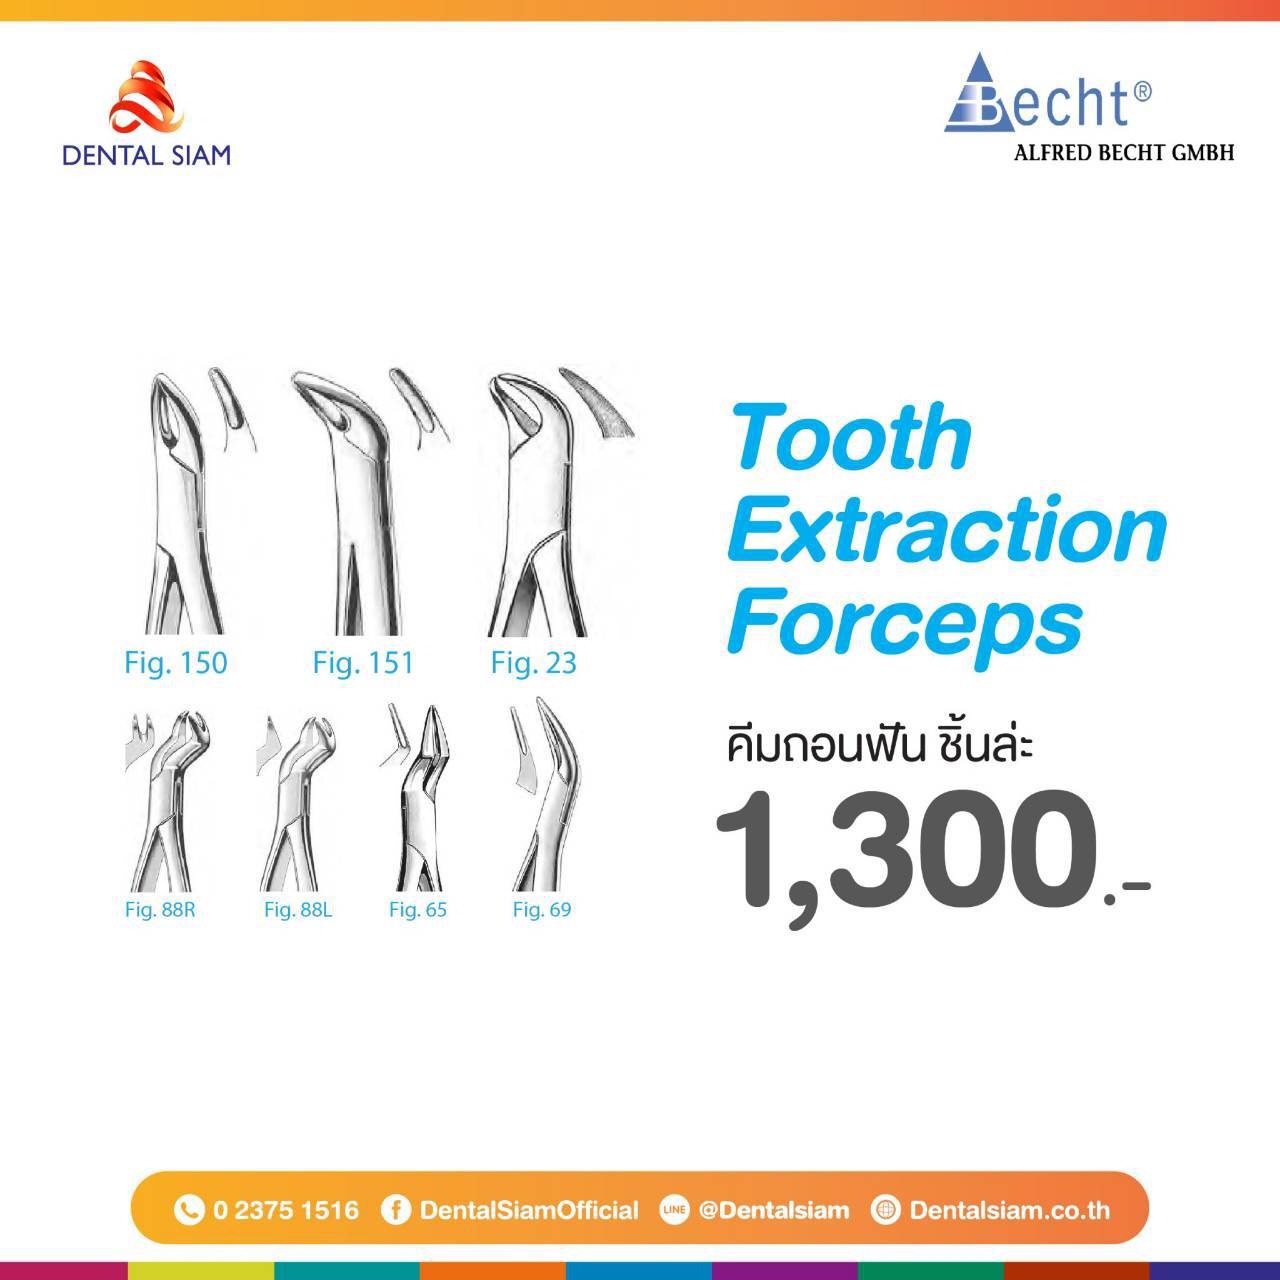 Dental Siam Promotion "Tooth Extraction Forceps"